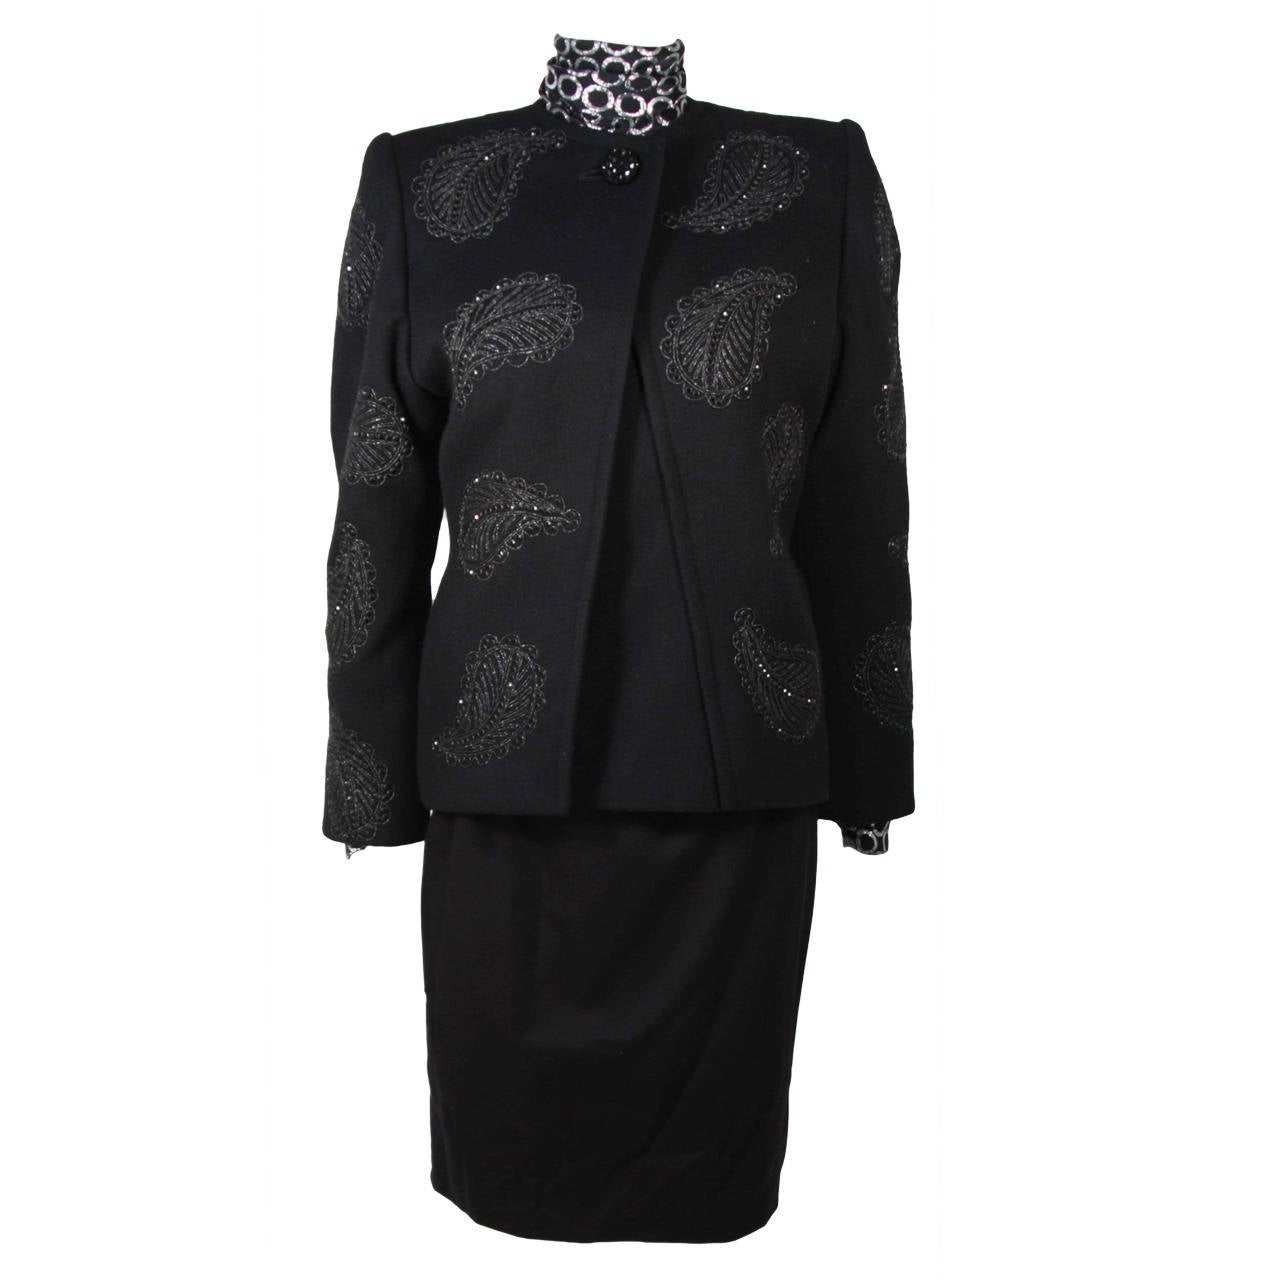 Galanos Black Wool Embroidered Jacket with Silk Metallic Blouse Skirt Size 2-4